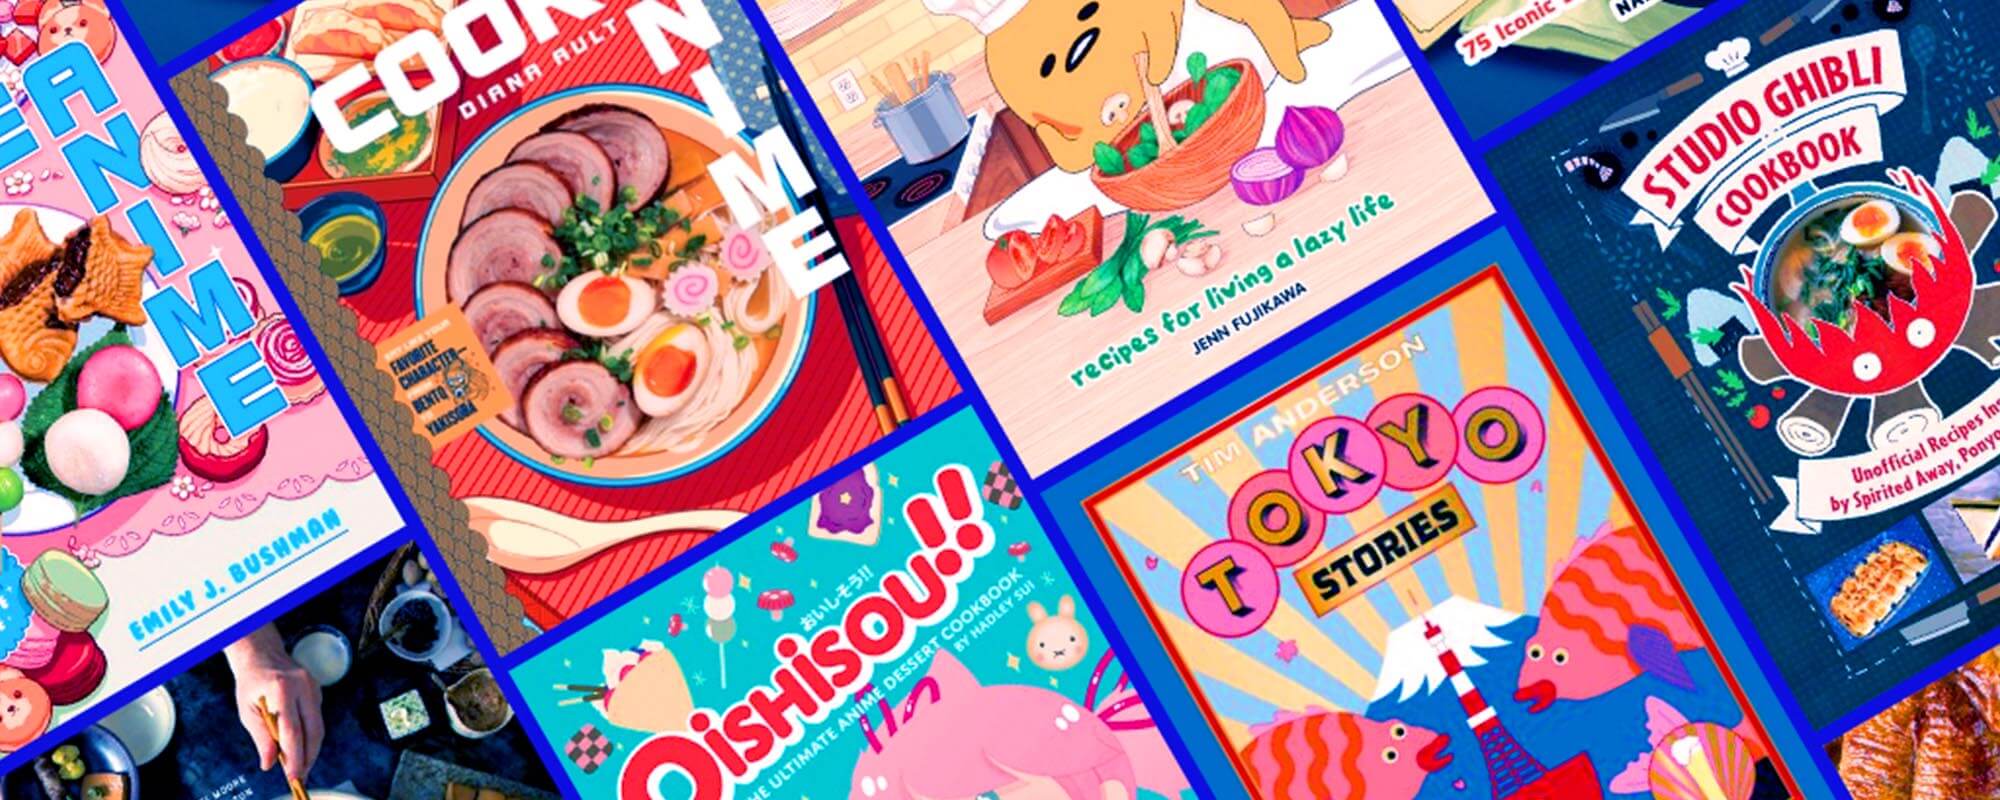 Real Life Anime Food Recipes: Yummy Anime Recipes You Can Make At Home:  Anime Mange Foods by DEBRA TREVINO | Goodreads